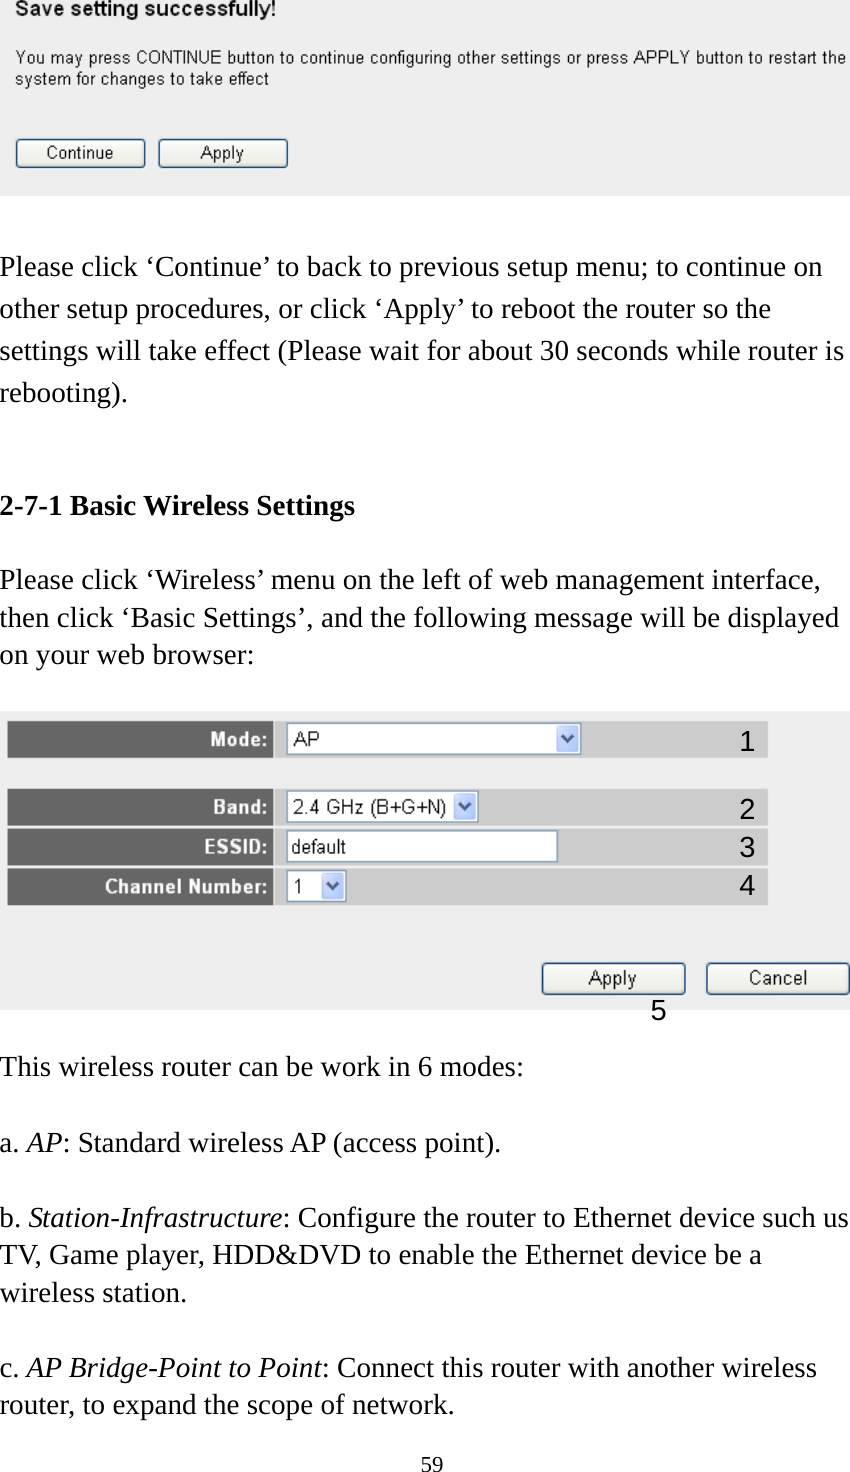 59   Please click ‘Continue’ to back to previous setup menu; to continue on other setup procedures, or click ‘Apply’ to reboot the router so the settings will take effect (Please wait for about 30 seconds while router is rebooting).   2-7-1 Basic Wireless Settings  Please click ‘Wireless’ menu on the left of web management interface, then click ‘Basic Settings’, and the following message will be displayed on your web browser:    This wireless router can be work in 6 modes:    a. AP: Standard wireless AP (access point).  b. Station-Infrastructure: Configure the router to Ethernet device such us TV, Game player, HDD&amp;DVD to enable the Ethernet device be a wireless station.  c. AP Bridge-Point to Point: Connect this router with another wireless router, to expand the scope of network.   1 2 3 4 5 